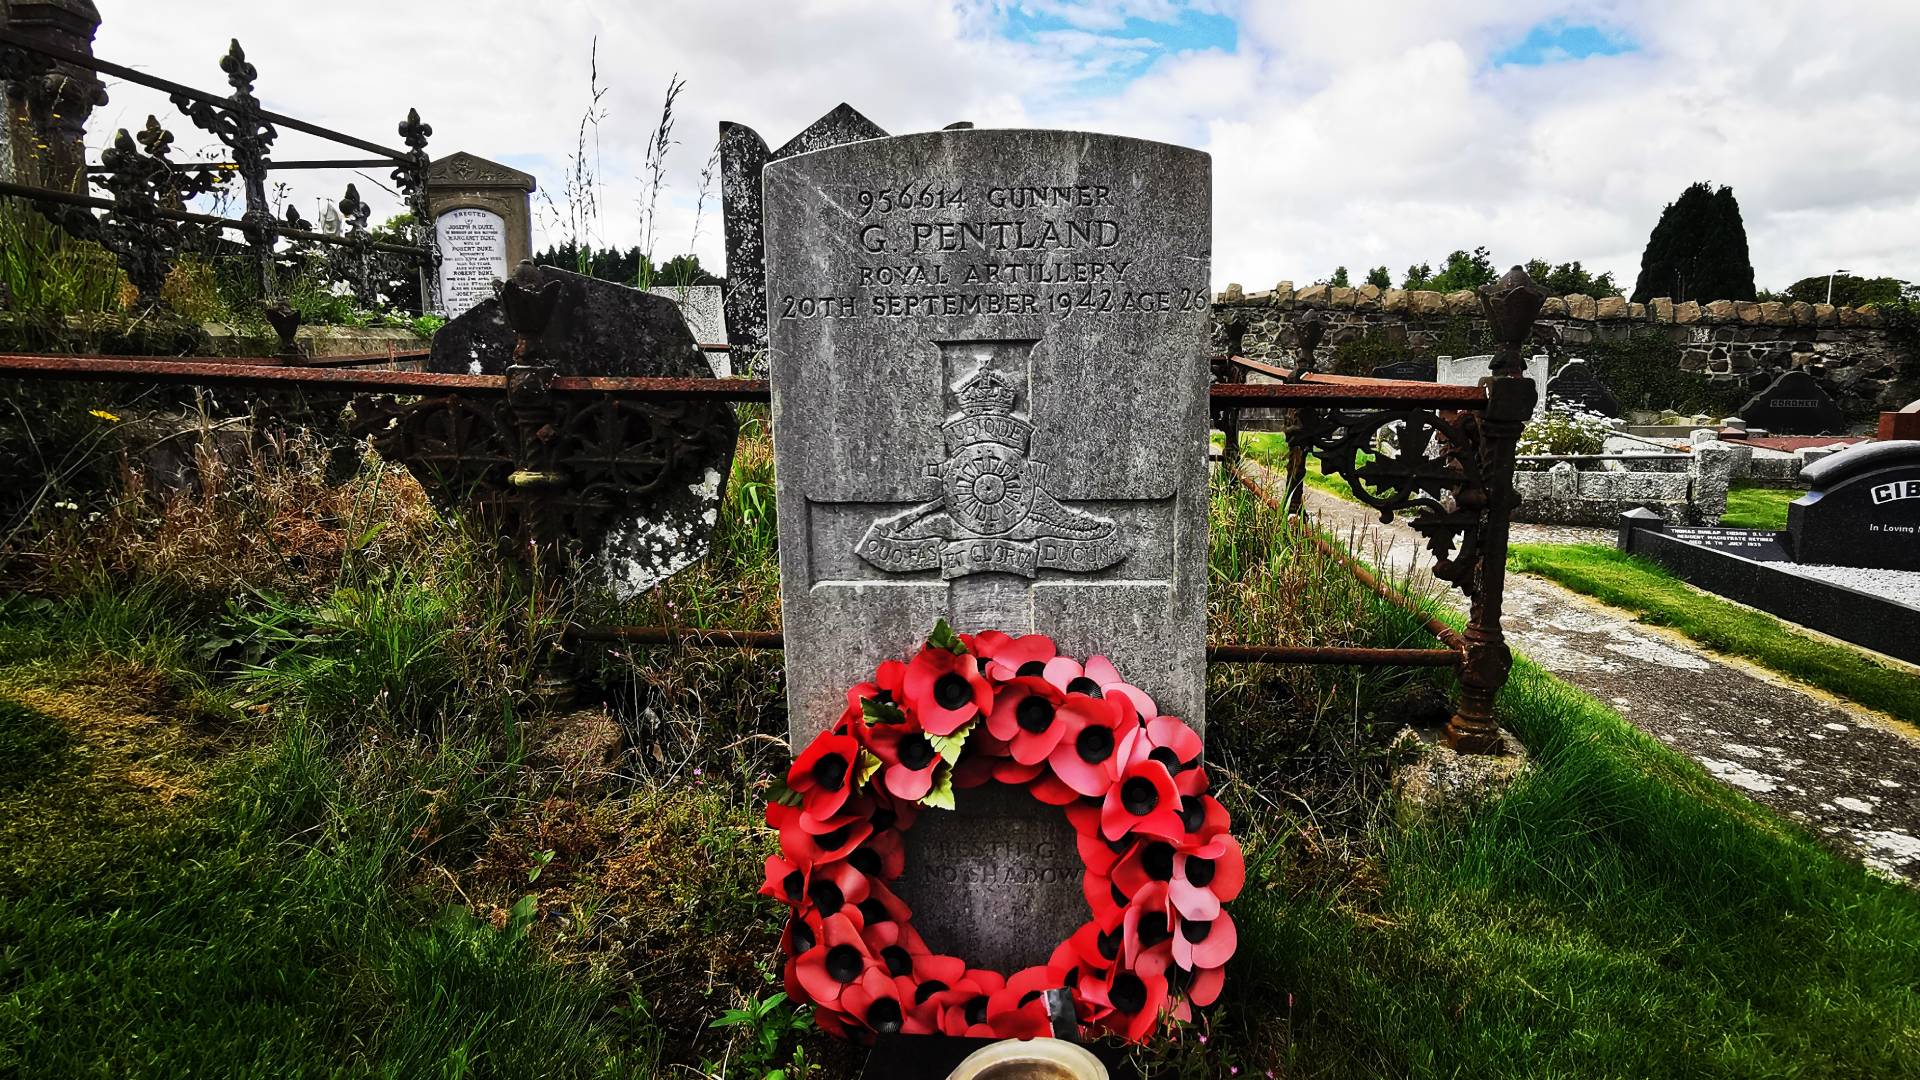 A Commonwealth War Graves headstone marks the grave of Gunner George Pentland in Seagoe Cemetery, Portadown, Co. Armagh.